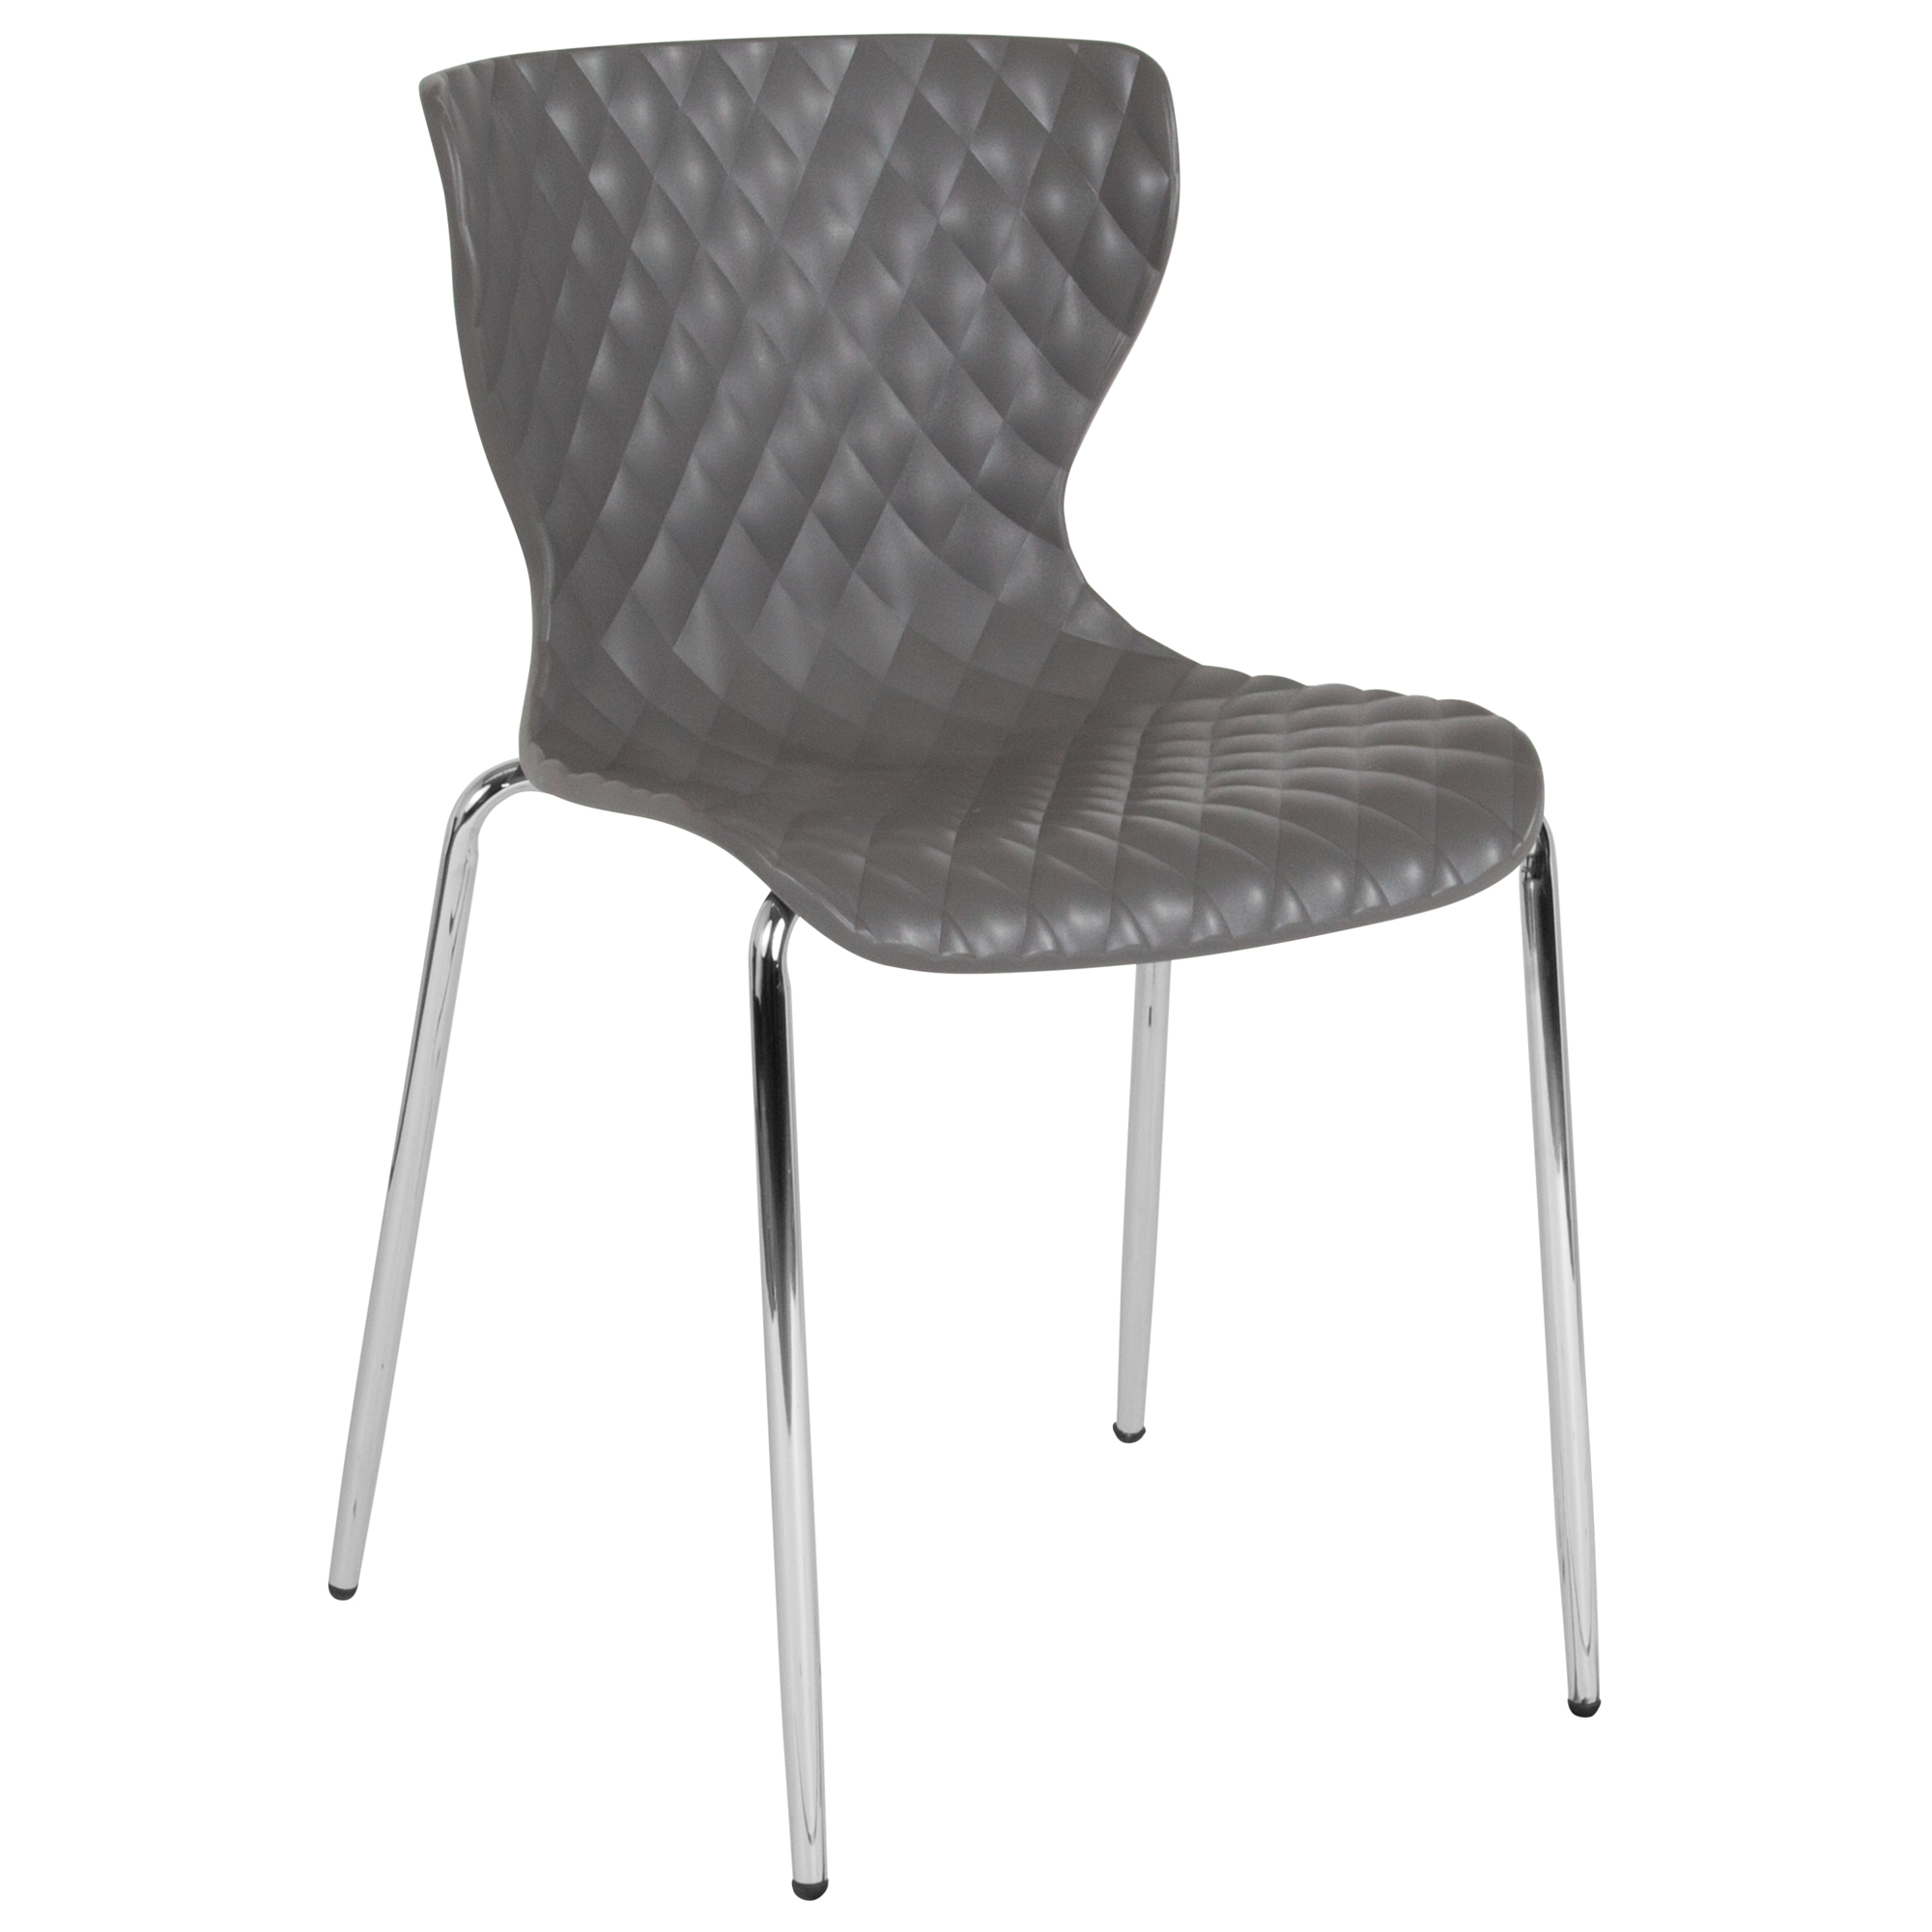 Flash Furniture, Contemporary Gray Plastic Stack Chair, Primary Color Gray, Included (qty.) 1, Model LF707CGRY